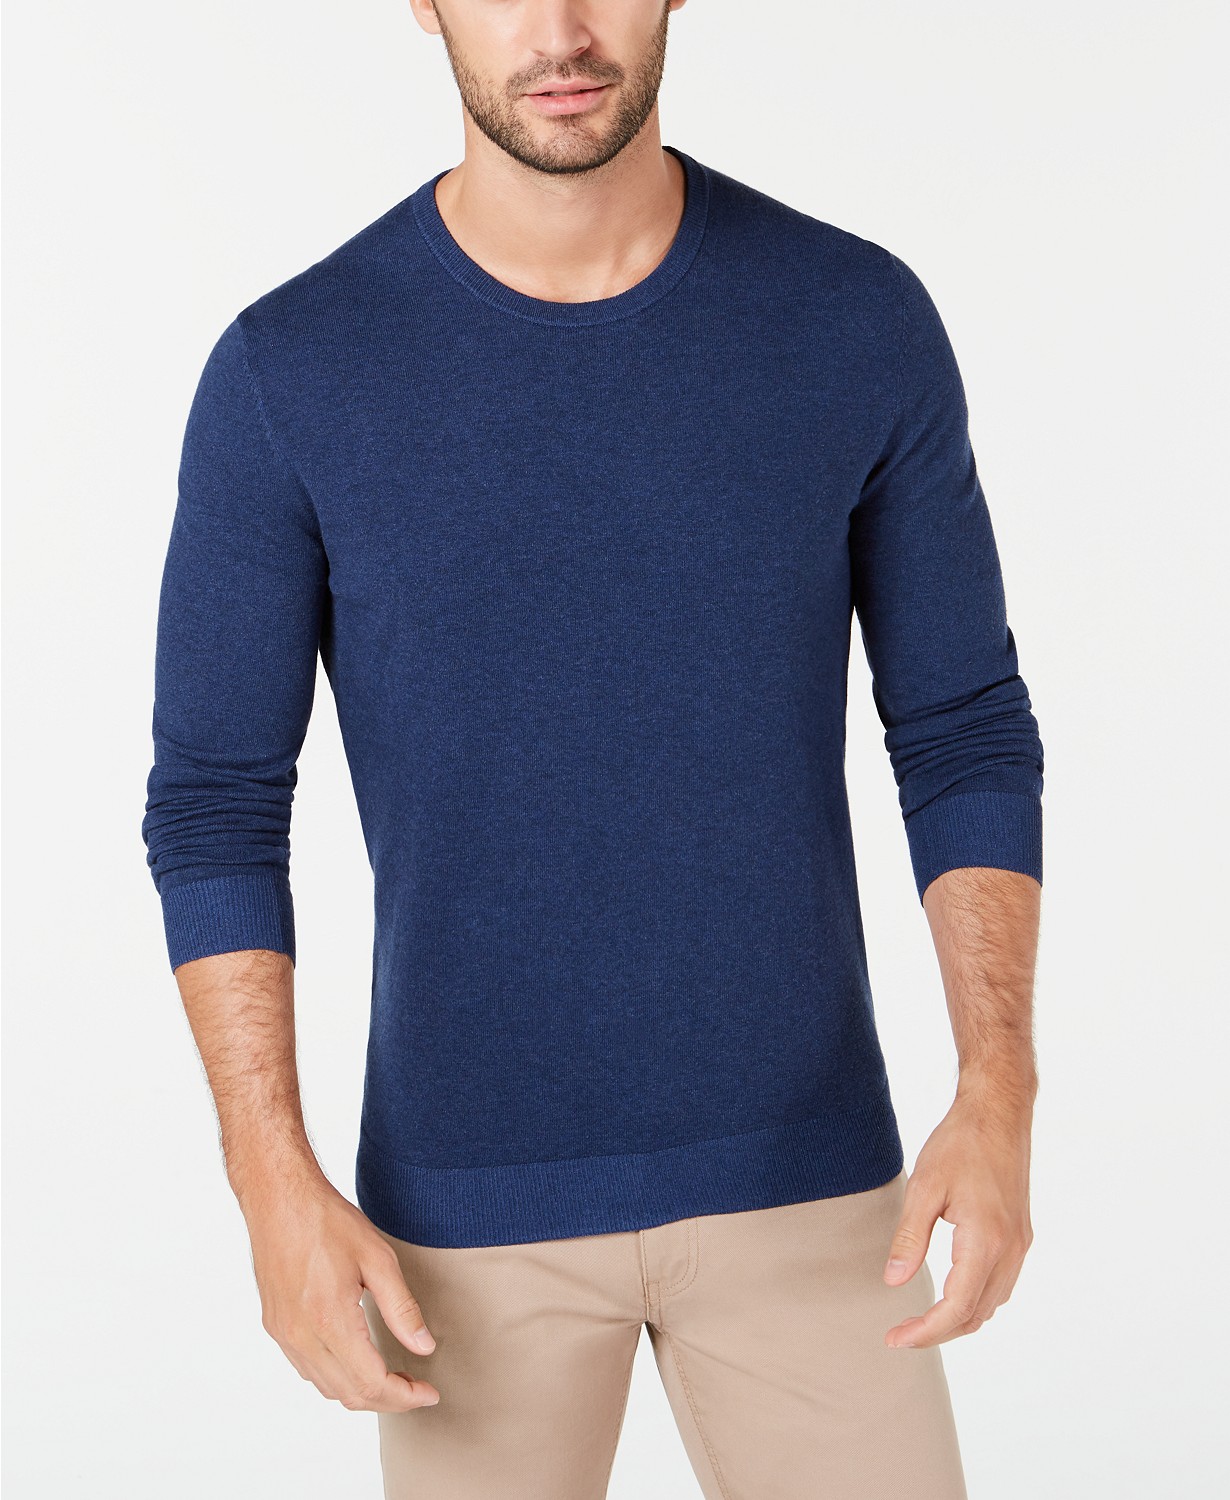 www.couturepoint.com-alfani-mens-navy-solid-crewneck-long-sleeves-sweater